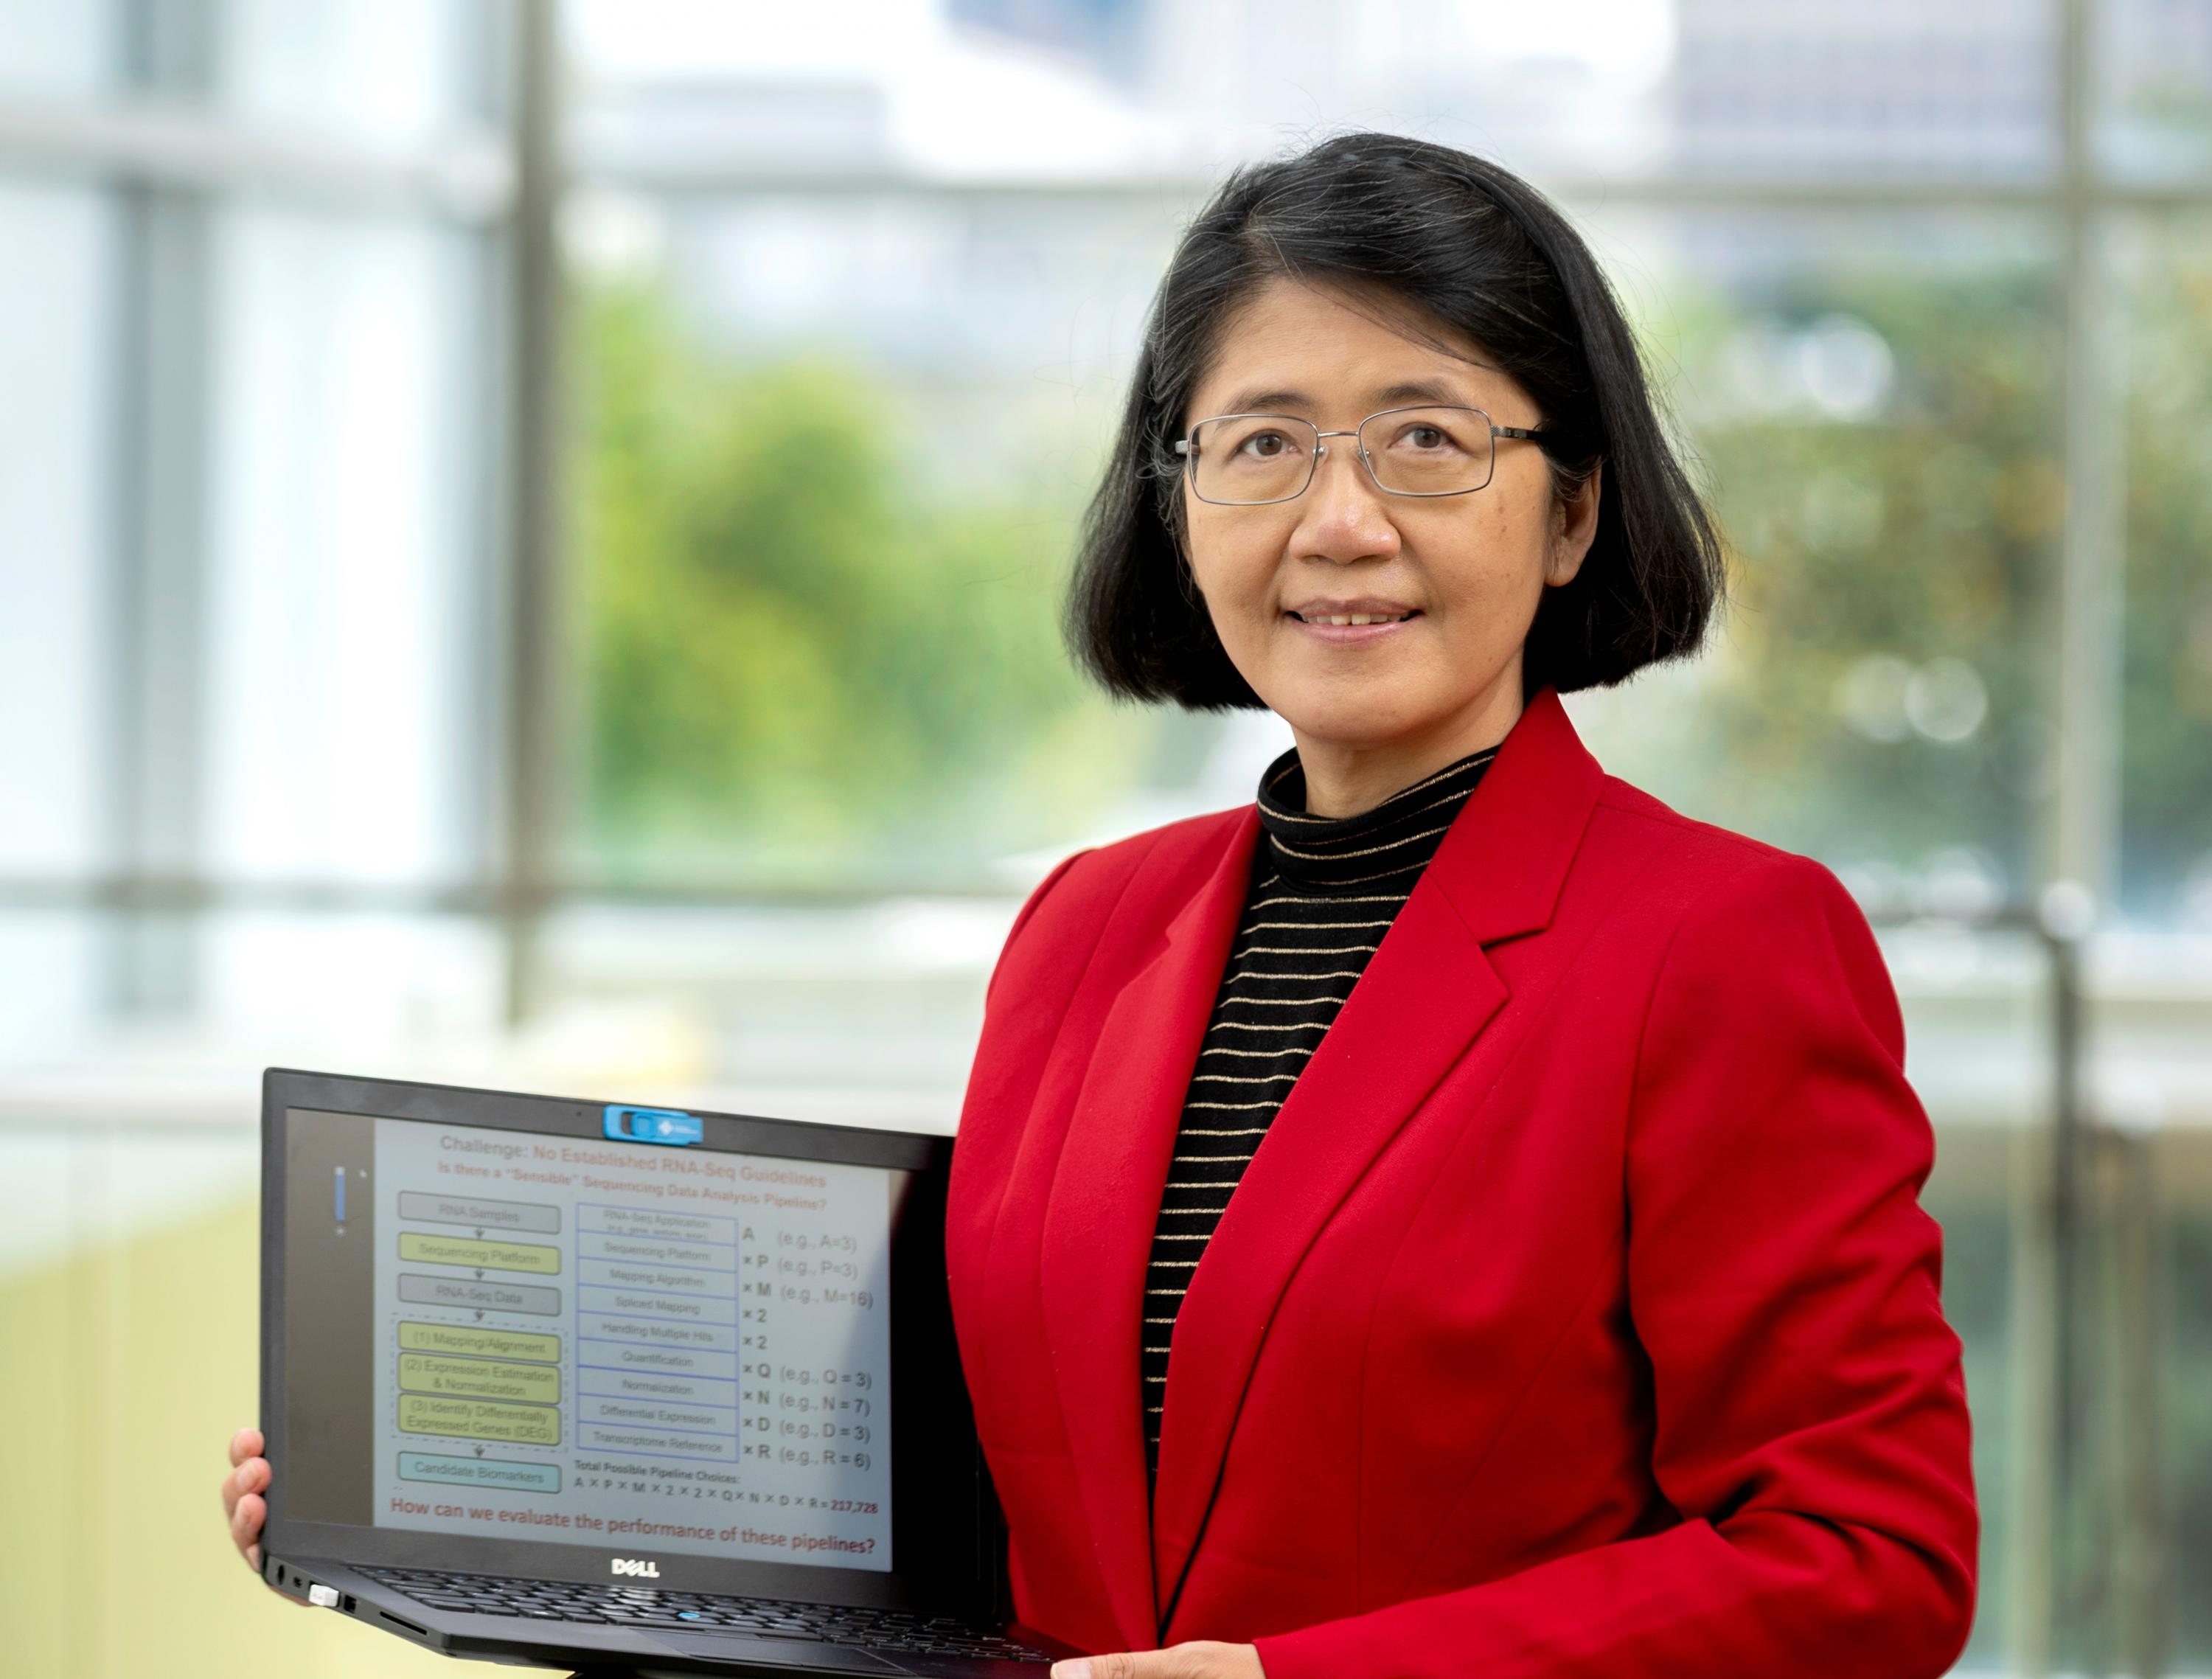 May Dongmei Wang, a professor in the Wallace H. Coulter Department of Biomedical Engineering at Georgia Tech and Emory University, shows a flowchart for evaluating sequencing. (Credit: Christopher Moore, Georgia Tech)